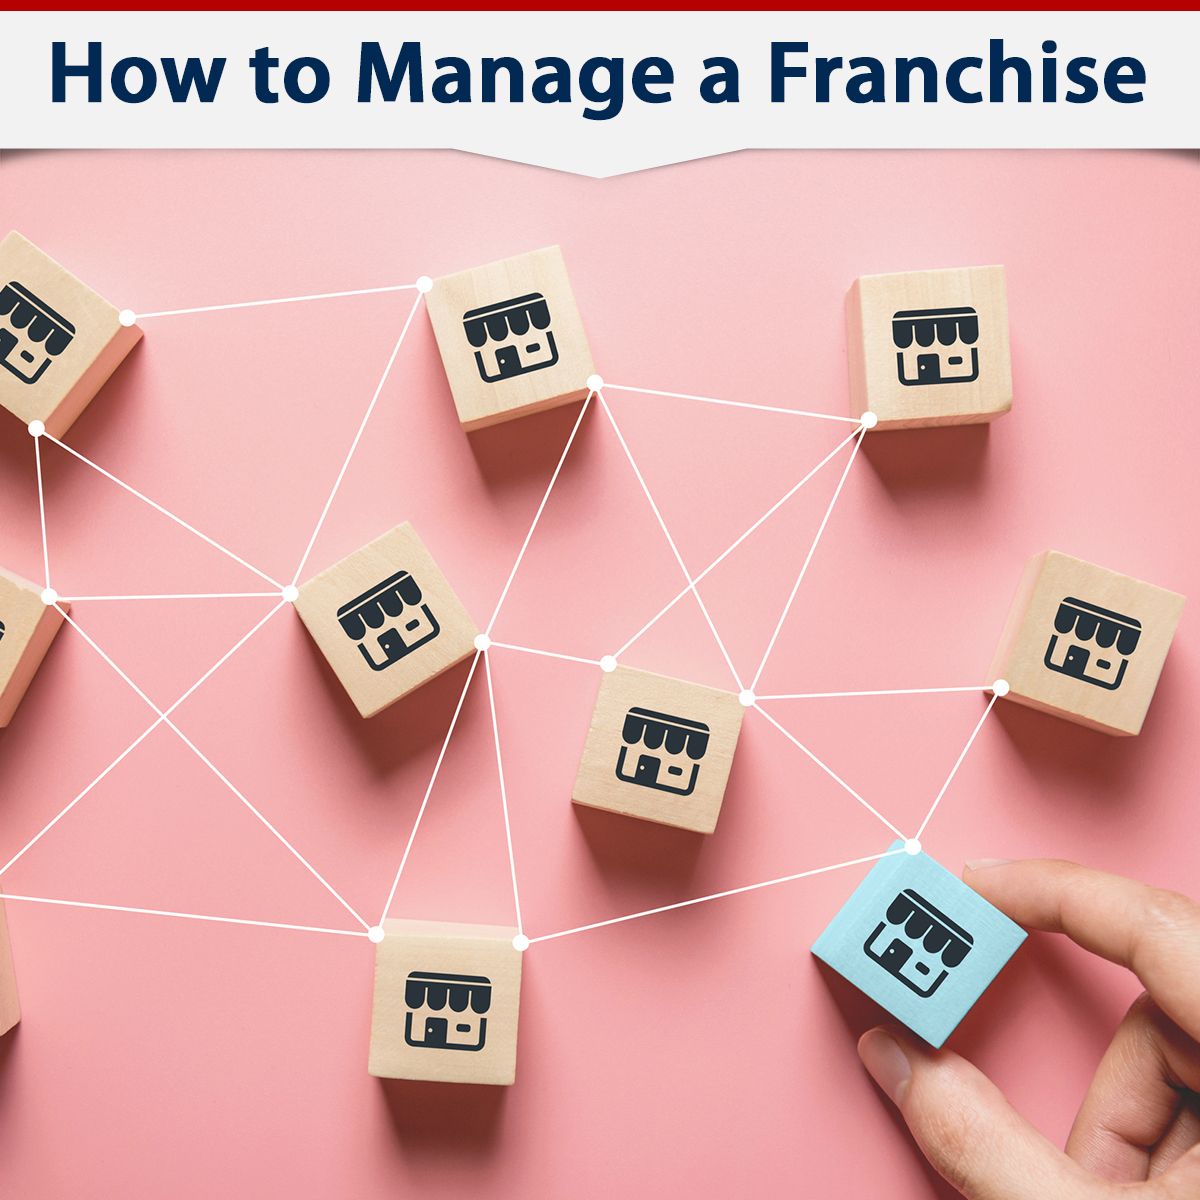 How to Manage a Franchise